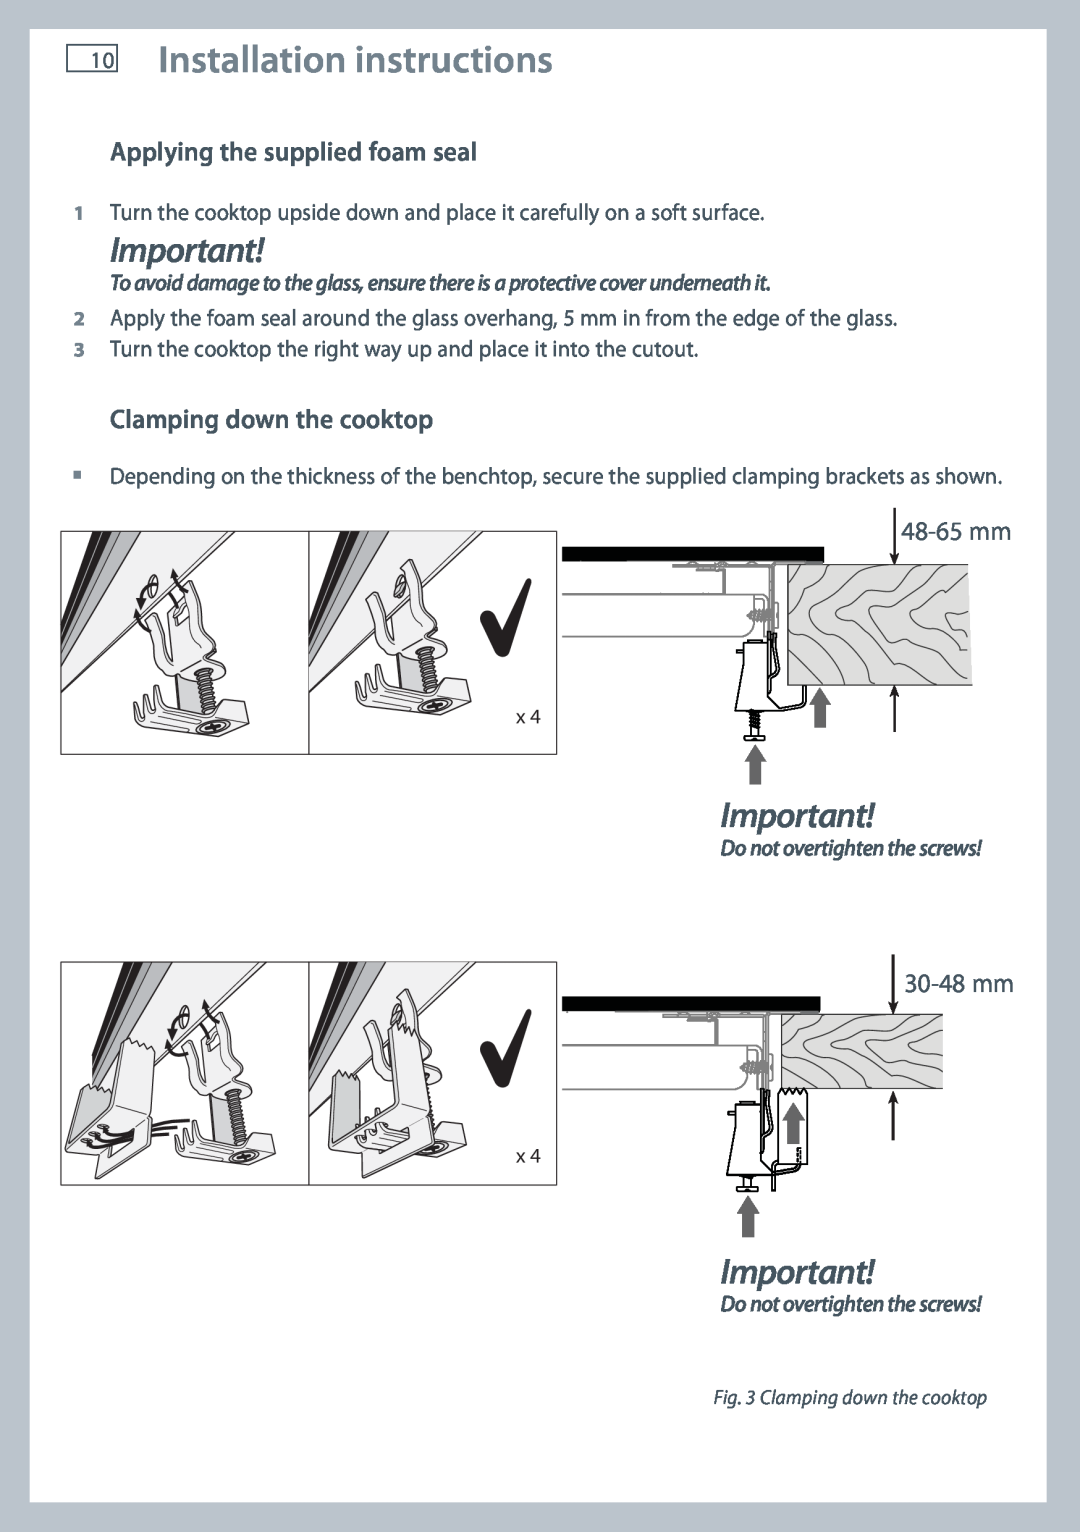 Fisher & Paykel CI754DT Installation instructions, Applying the supplied foam seal, Clamping down the cooktop, 48-65 mm 